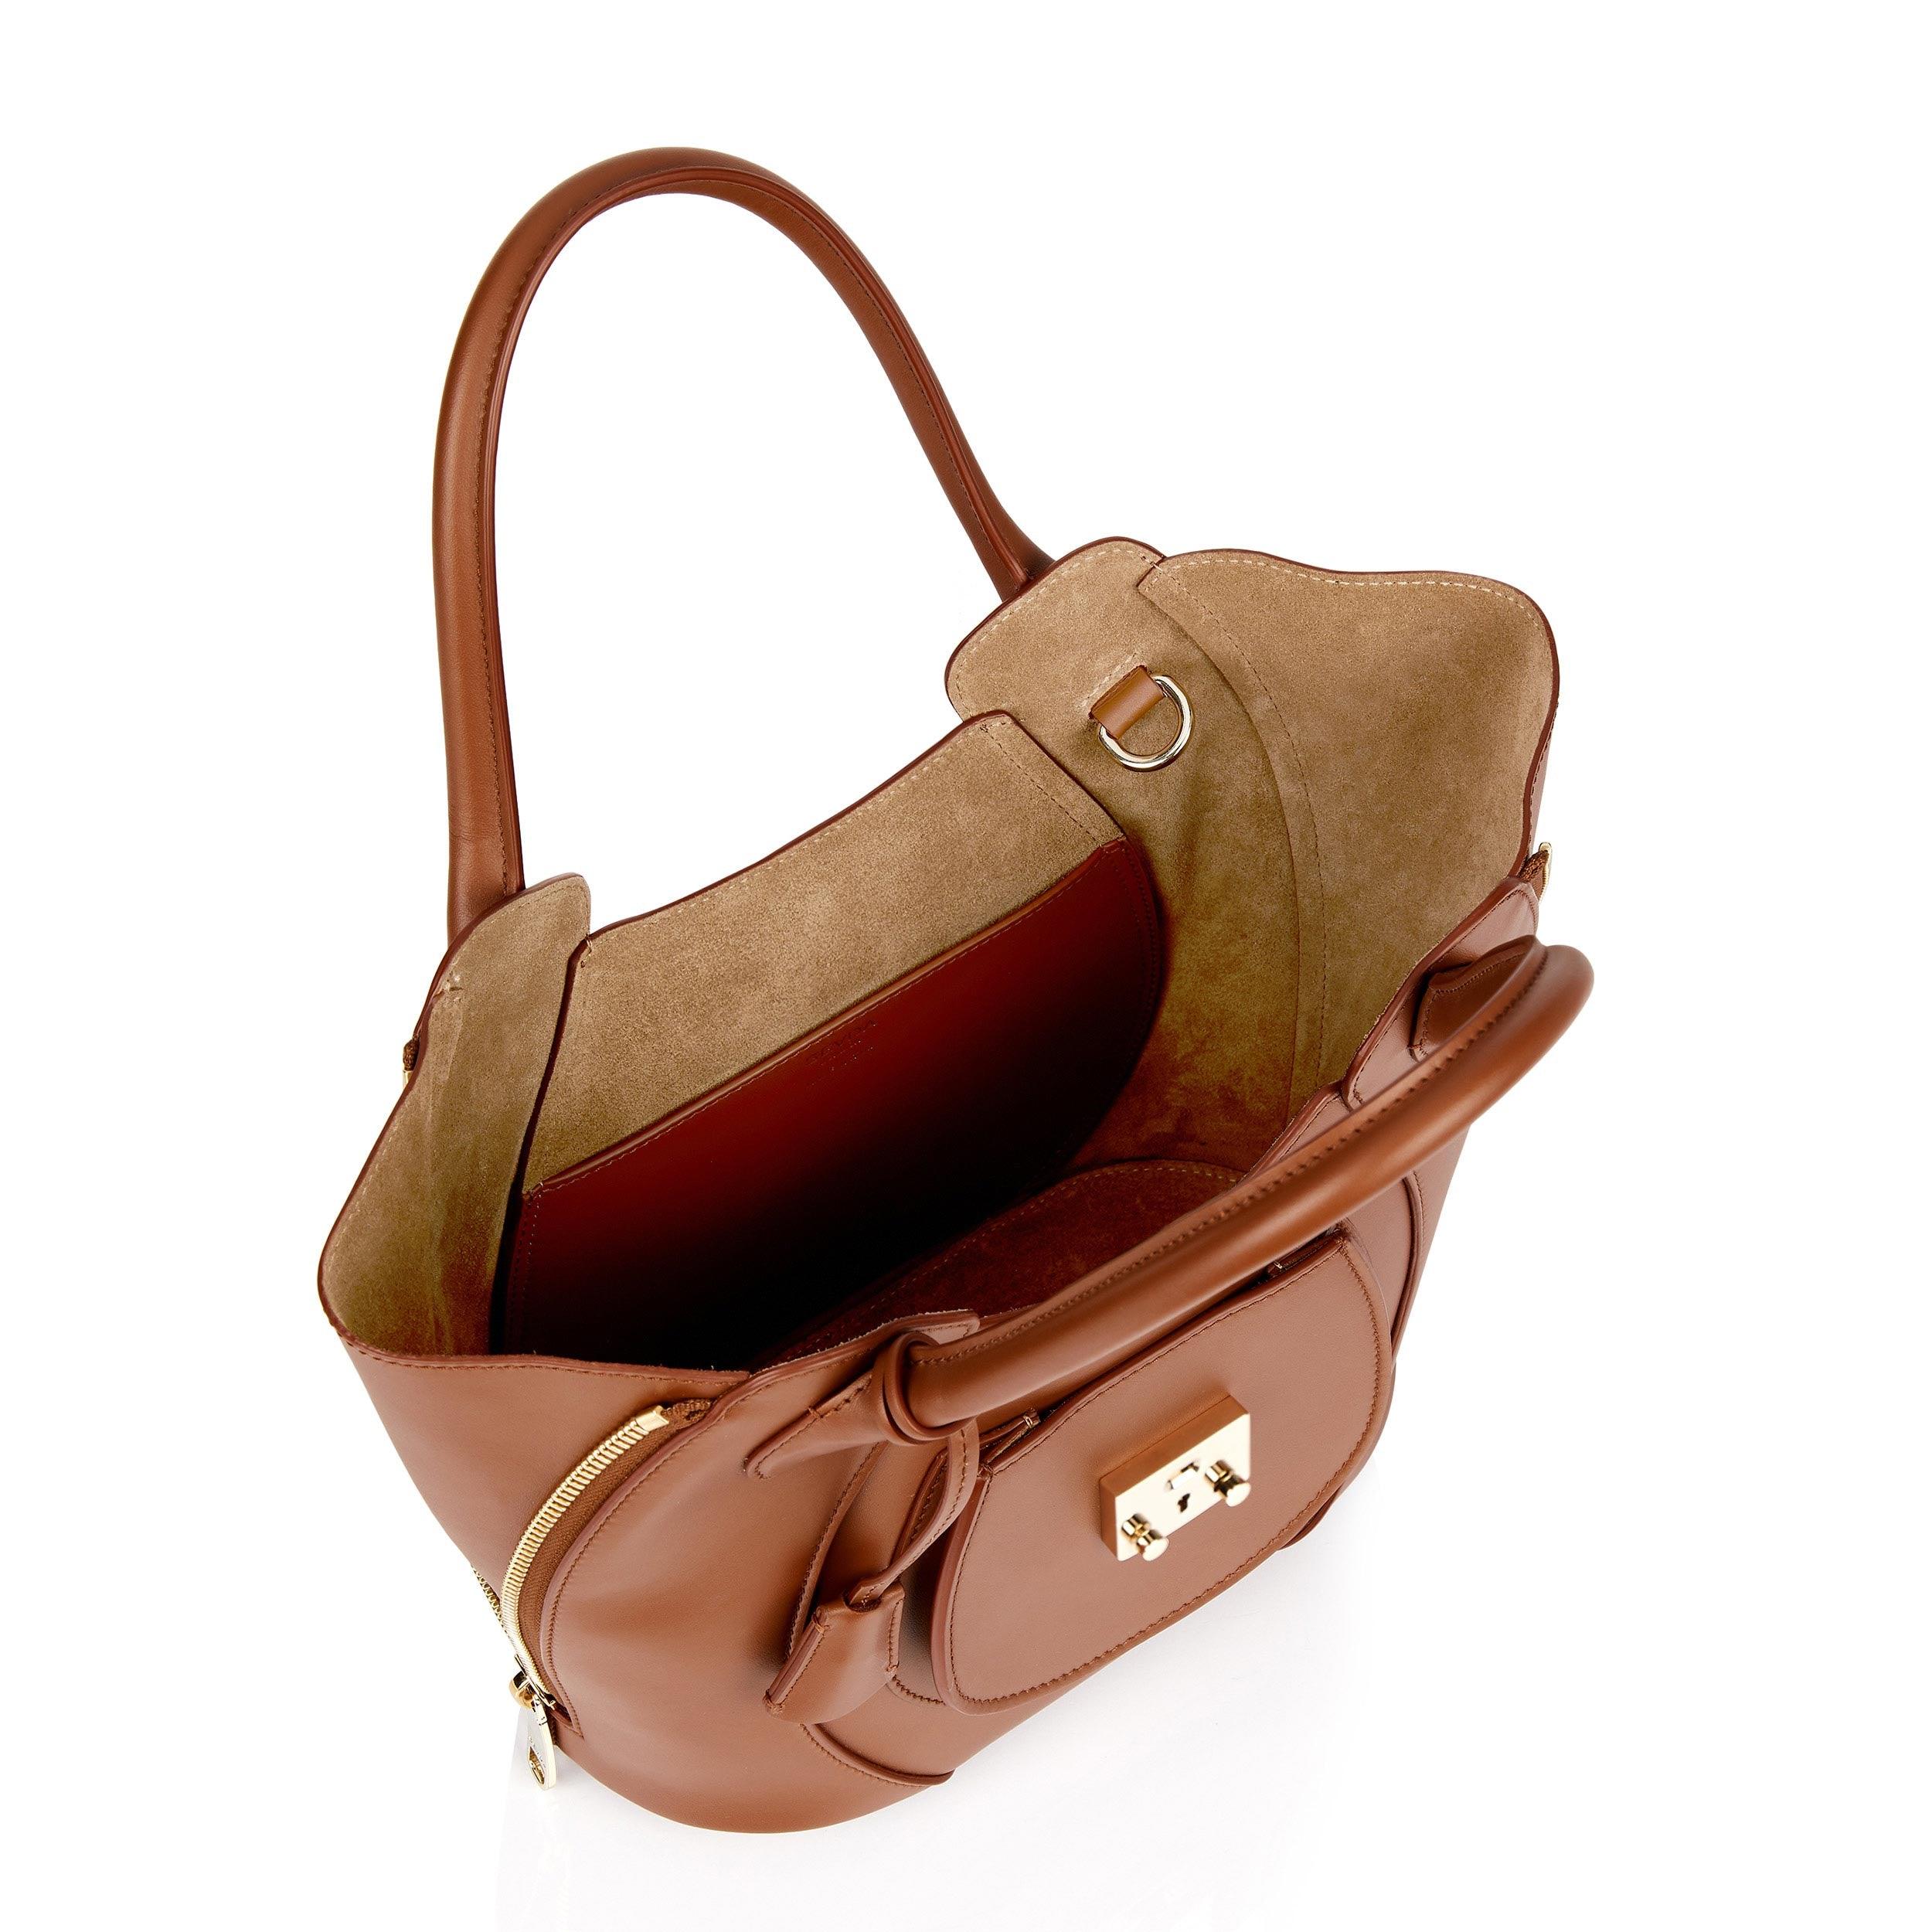 Tan Luxury Designer Bag - Marrying London's fashion with Italian craftsmanship, crafted from deforestation-free leather.